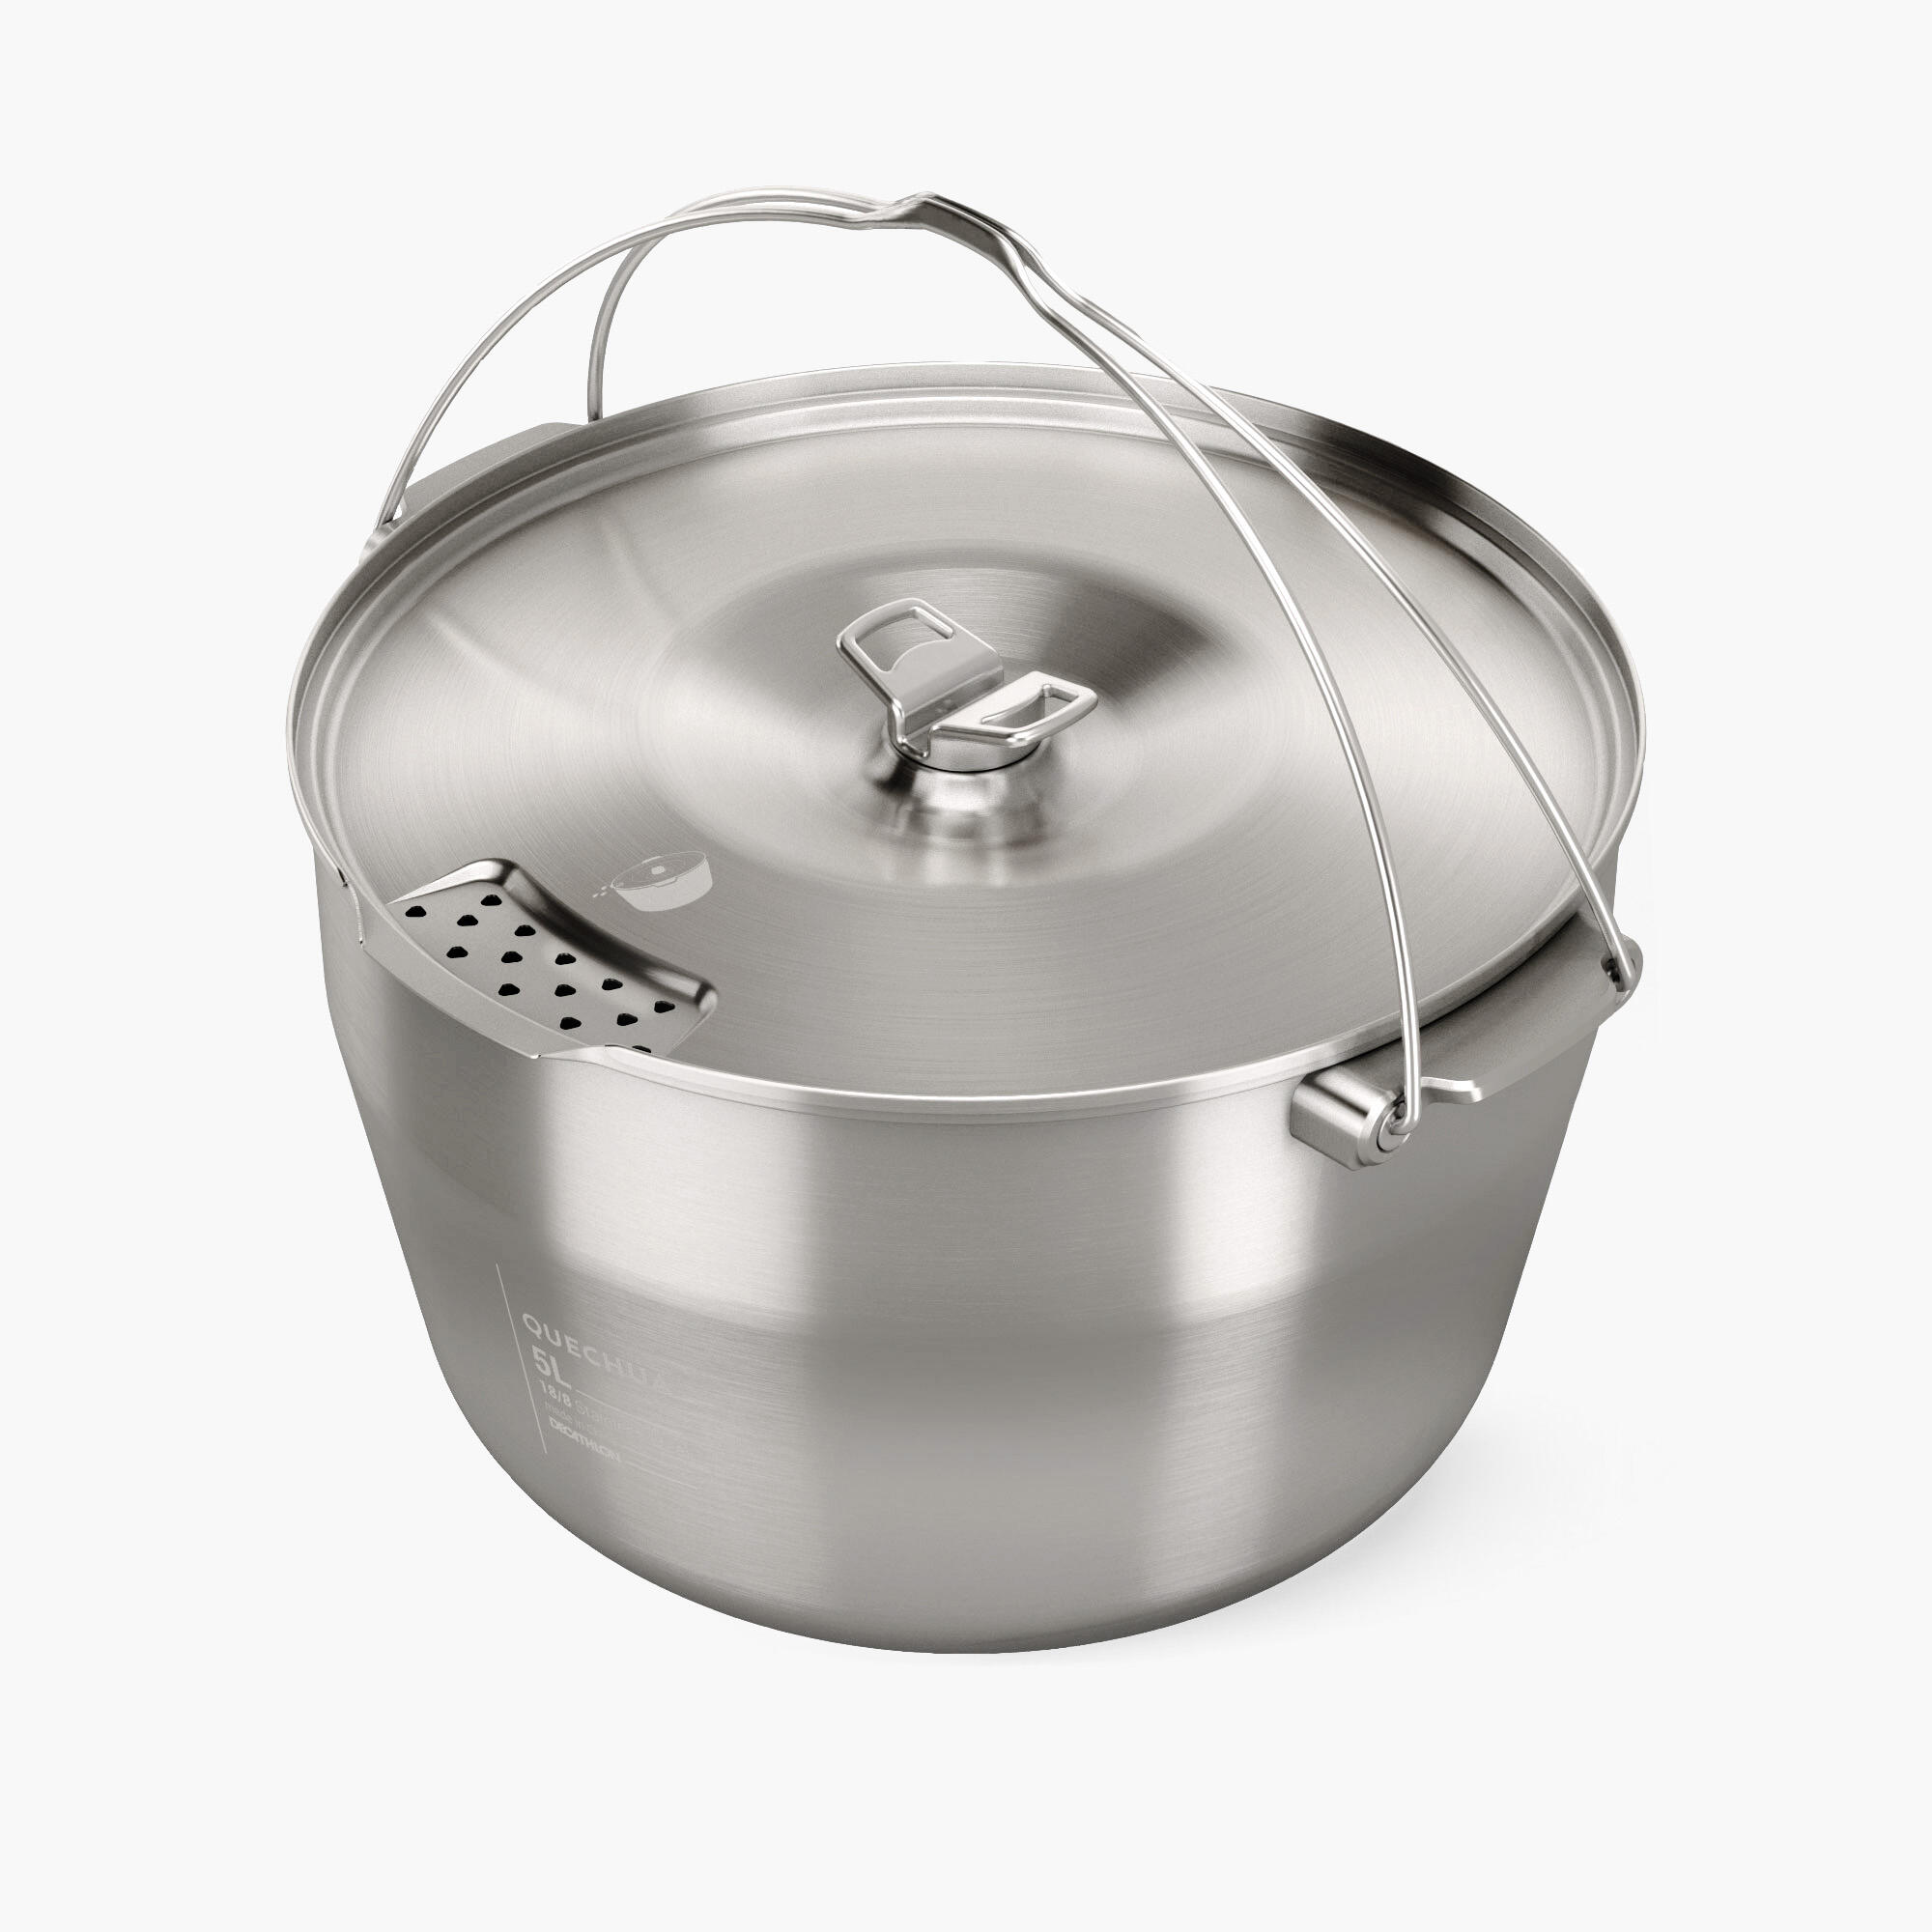 6-People Camping Cooking Pot - Stainless Steel - 5 Litres 2/9